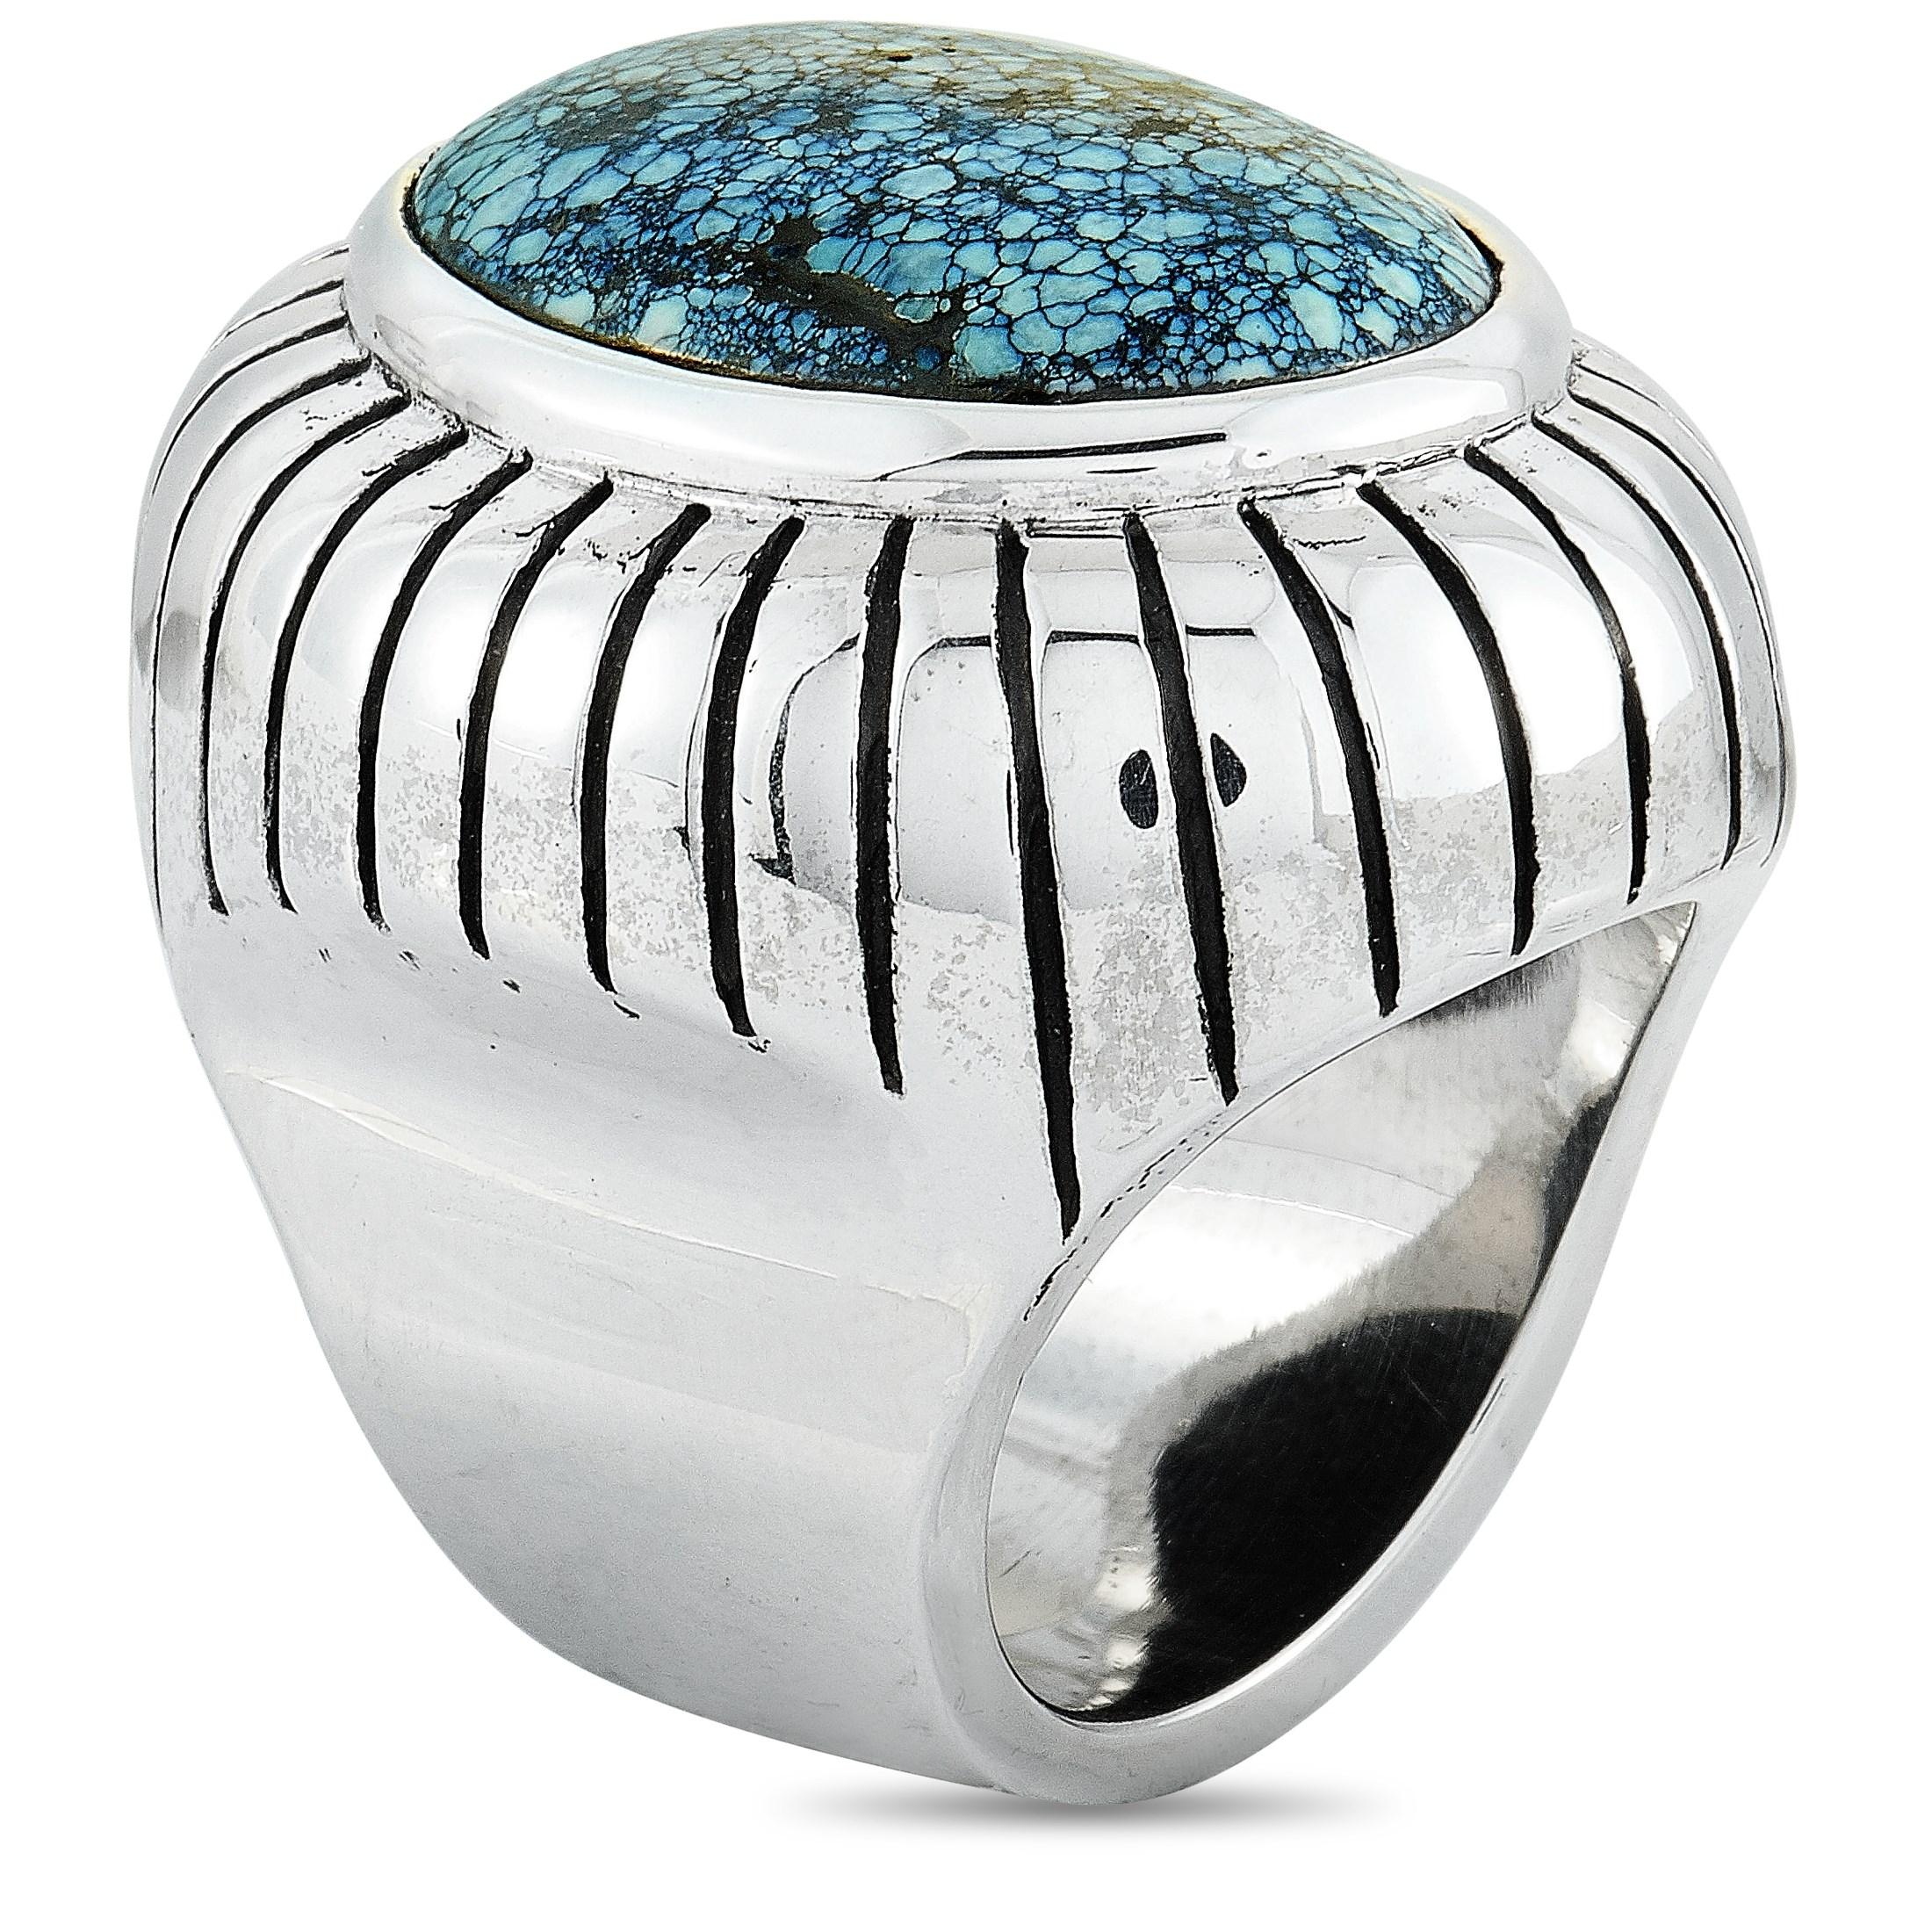 This King Baby ring is crafted from silver and set with an 18 by 25 mm spotted turquoise. The ring weighs 67.4 grams and boasts a band thickness of 10 mm and a top height of 13 mm, while top dimensions measure 27 by 34 mm.

Offered in brand-new